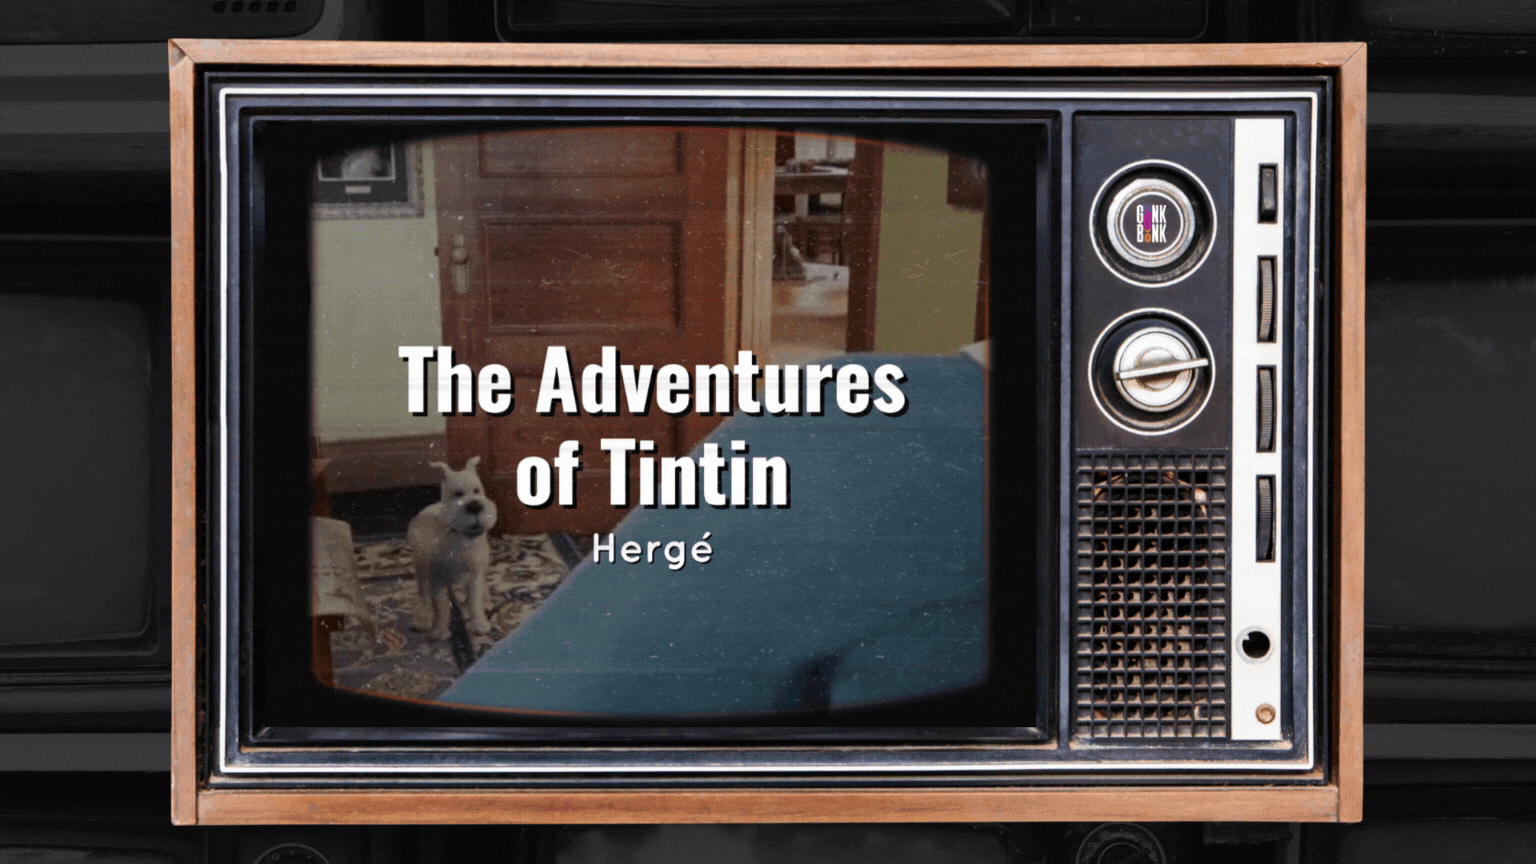 The Adventures of Tintin Movie and Comics